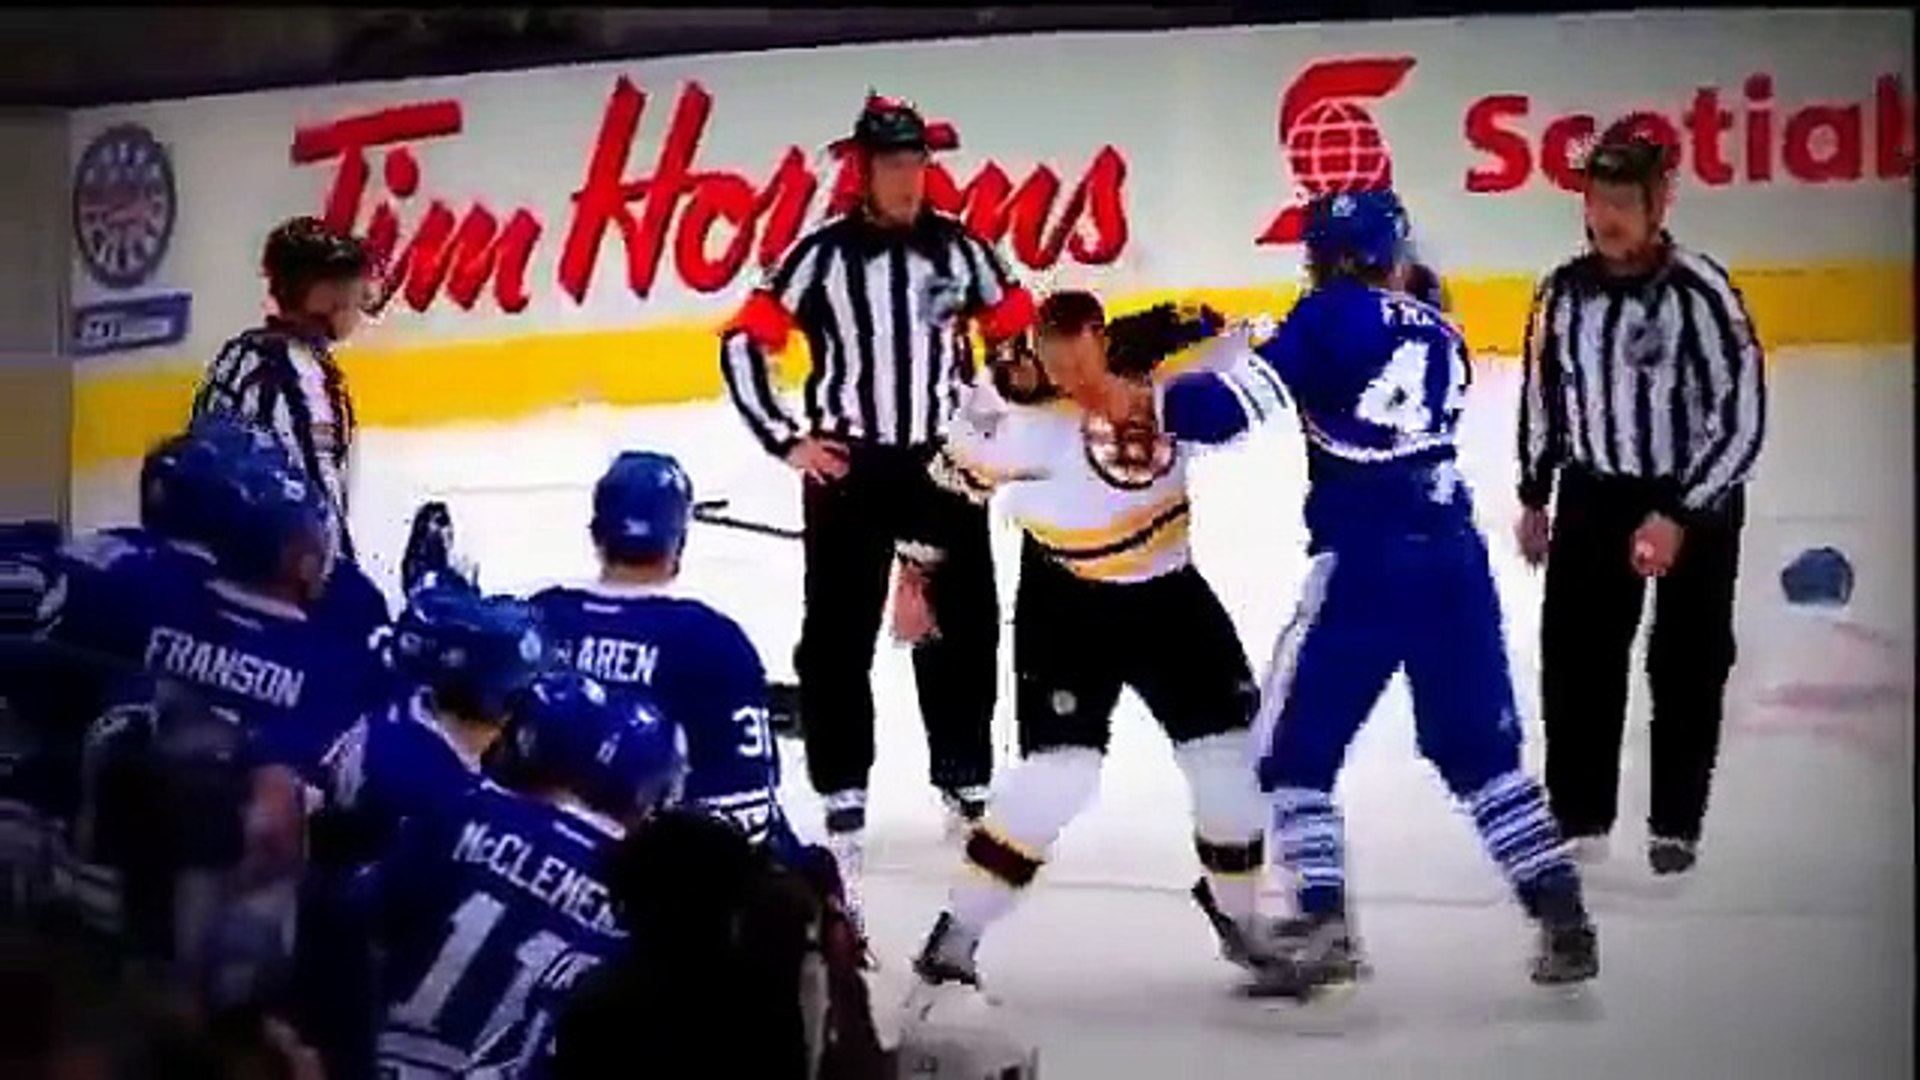 Toronto Maple Leafs Enforcers: The Fight Train - 2013 Tribute